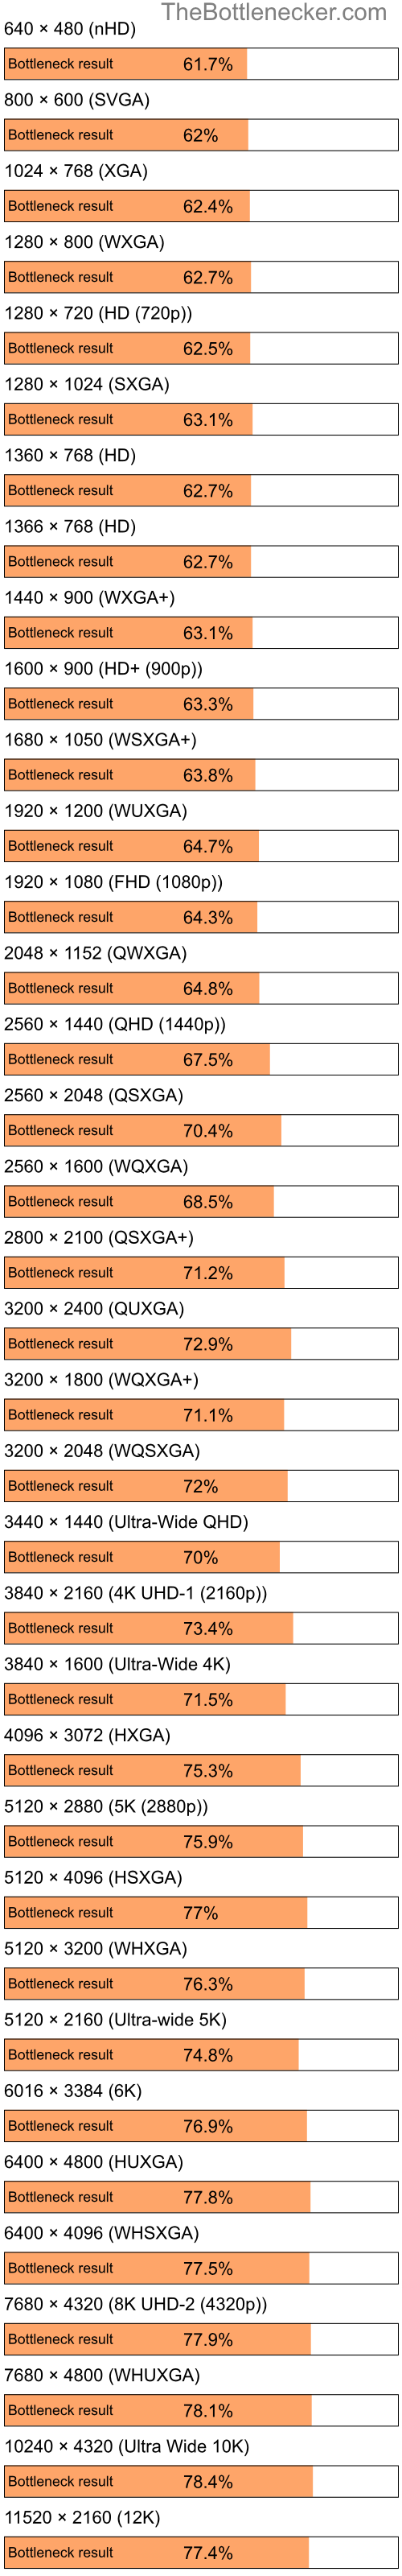 Bottleneck results by resolution for Intel Pentium 4 and AMD Radeon HD 6290 in7 Days to Die